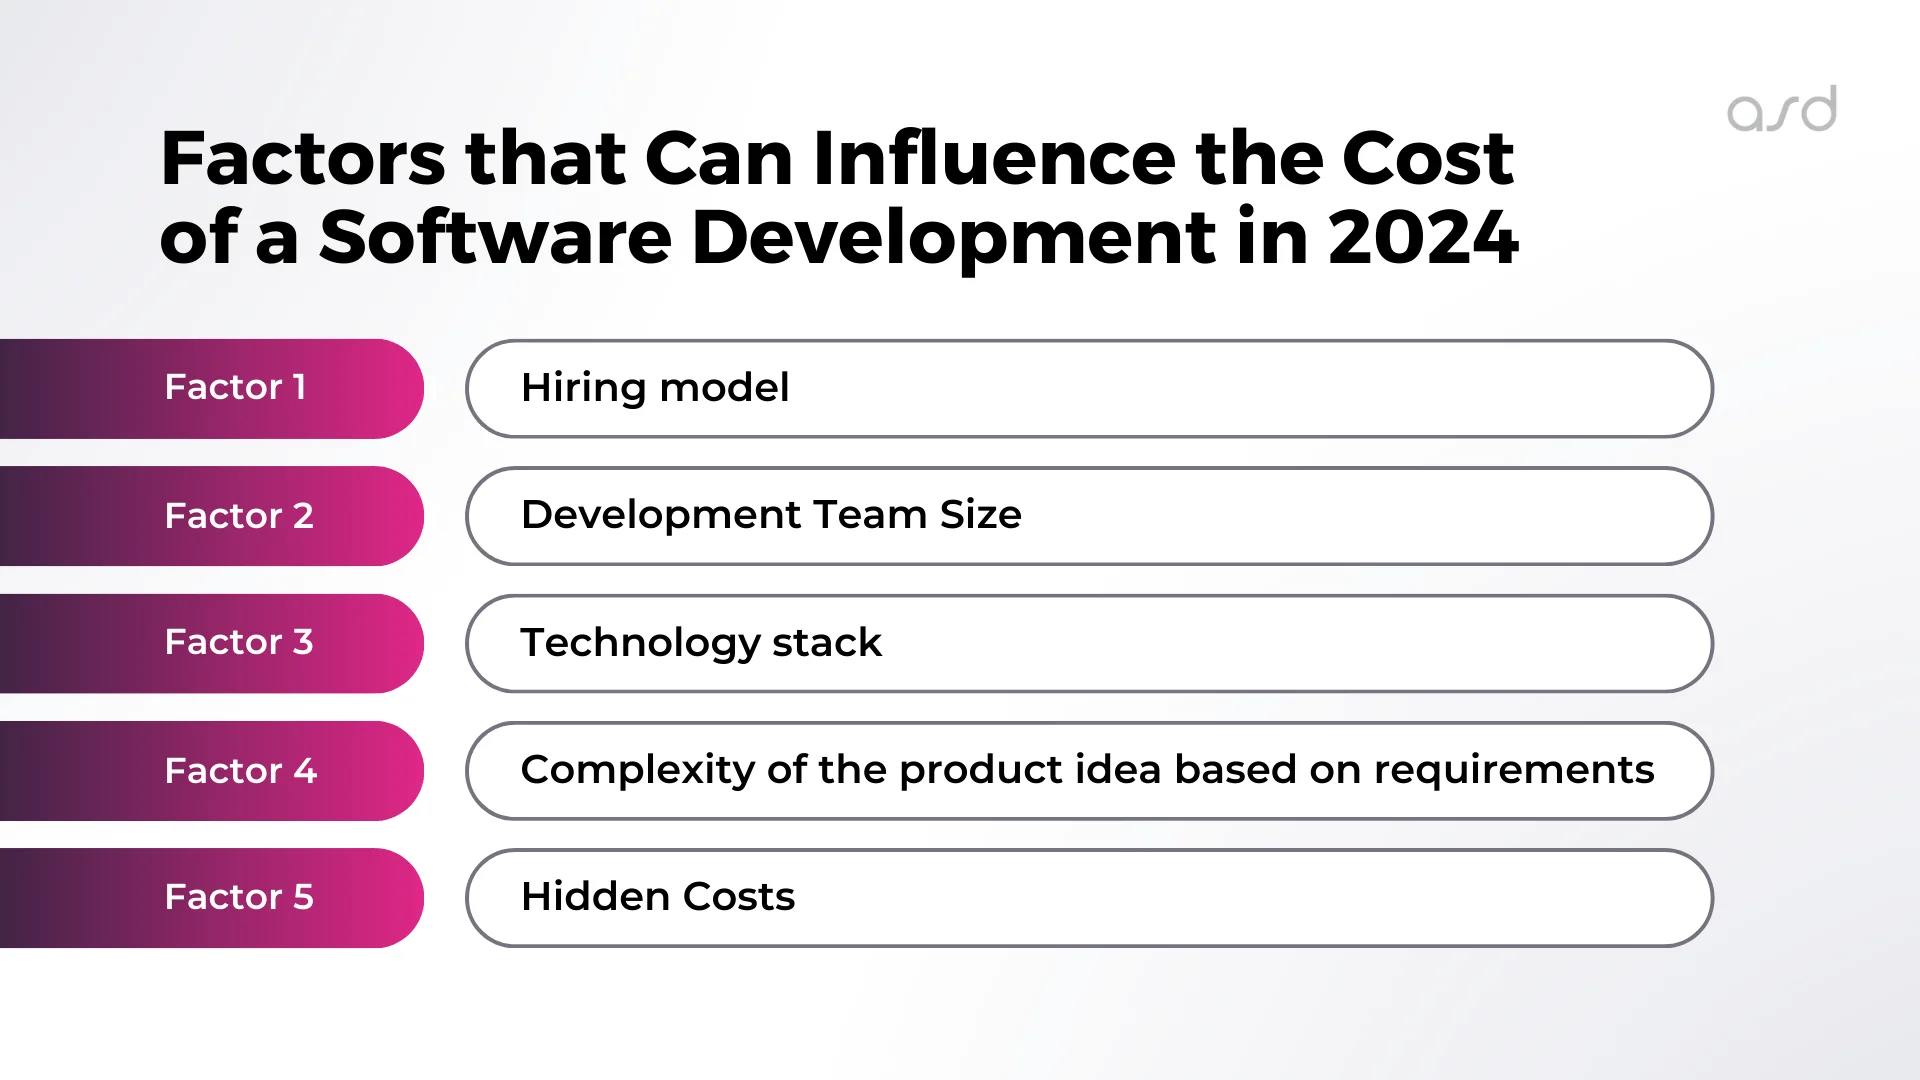 Factors that Can Influence the Cost of a Software Development in 2024